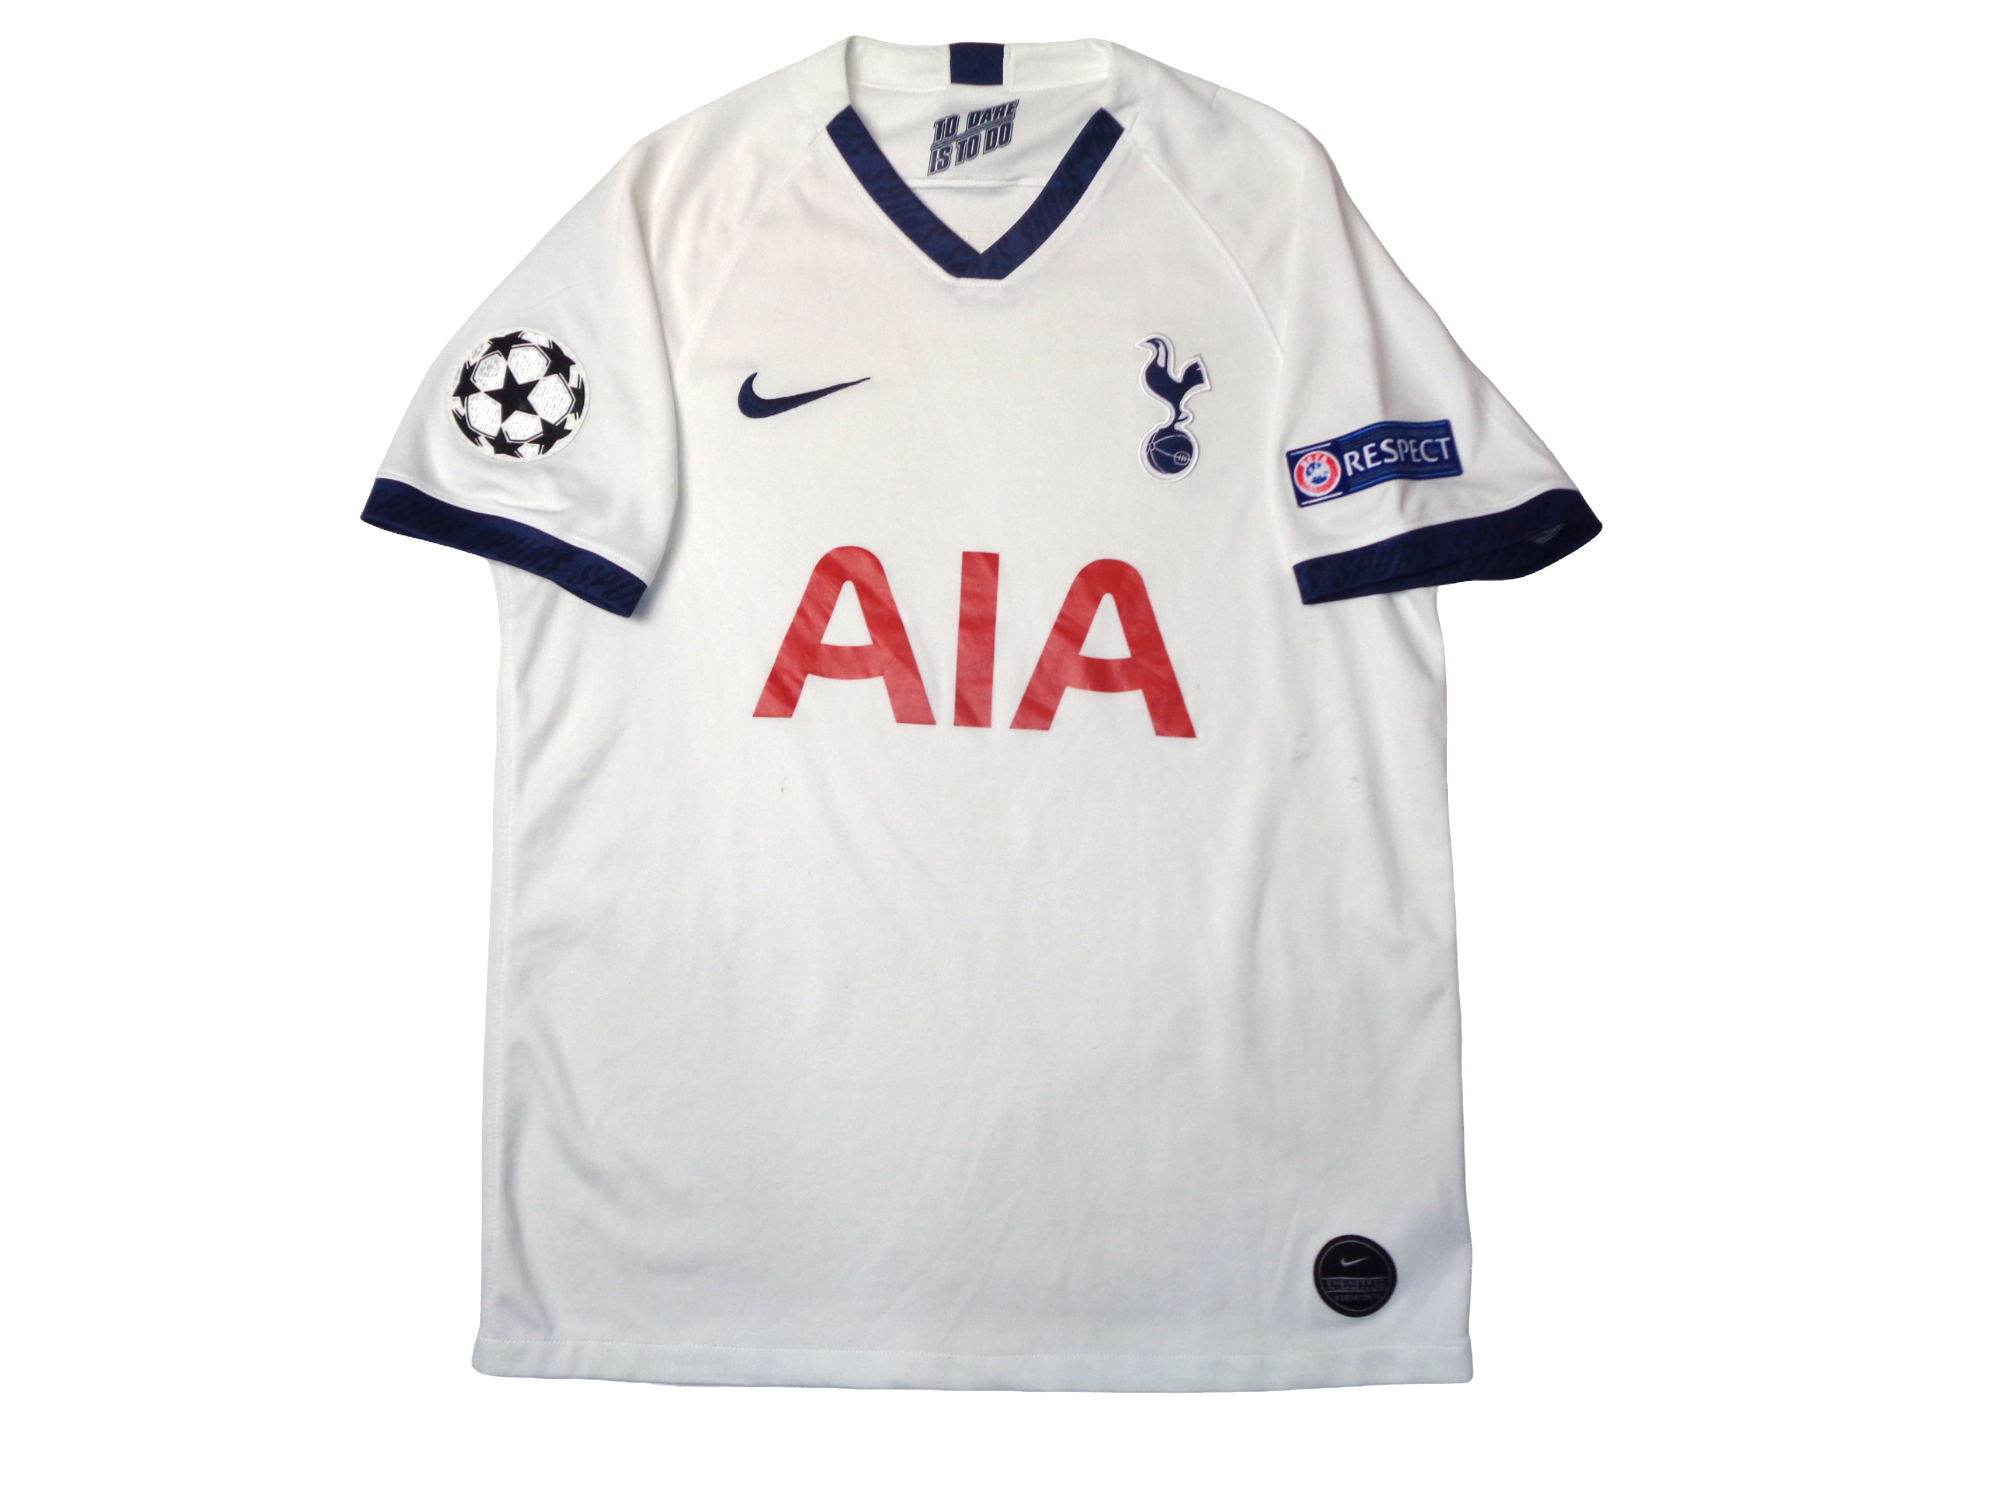 Nike Tottenham Lucas Moura Home Jersey w/ Champions League Patches 22/23 (White) Size 2XL